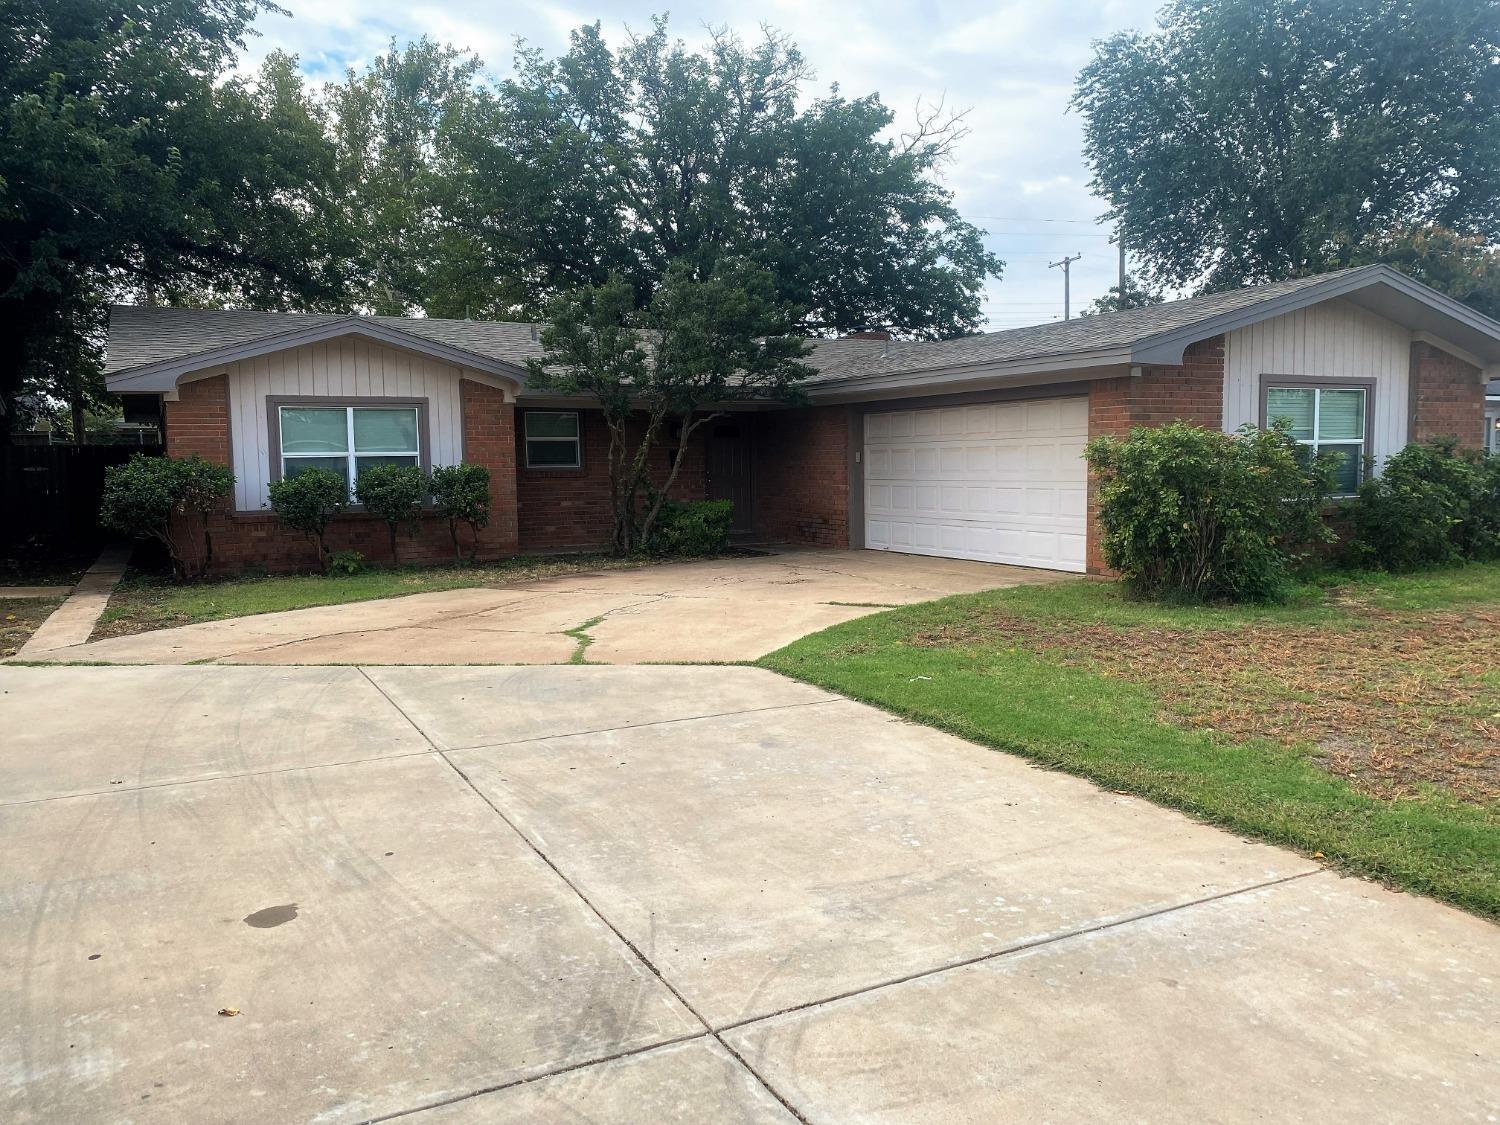 Come see this well maintained 3/2/2! Updated, lots of storage, and perfect for a family or college students. Convenient to LCU, TTU, hospitals, shopping, west loop, and Marsha Sharp FWY. Within walking distance to park!